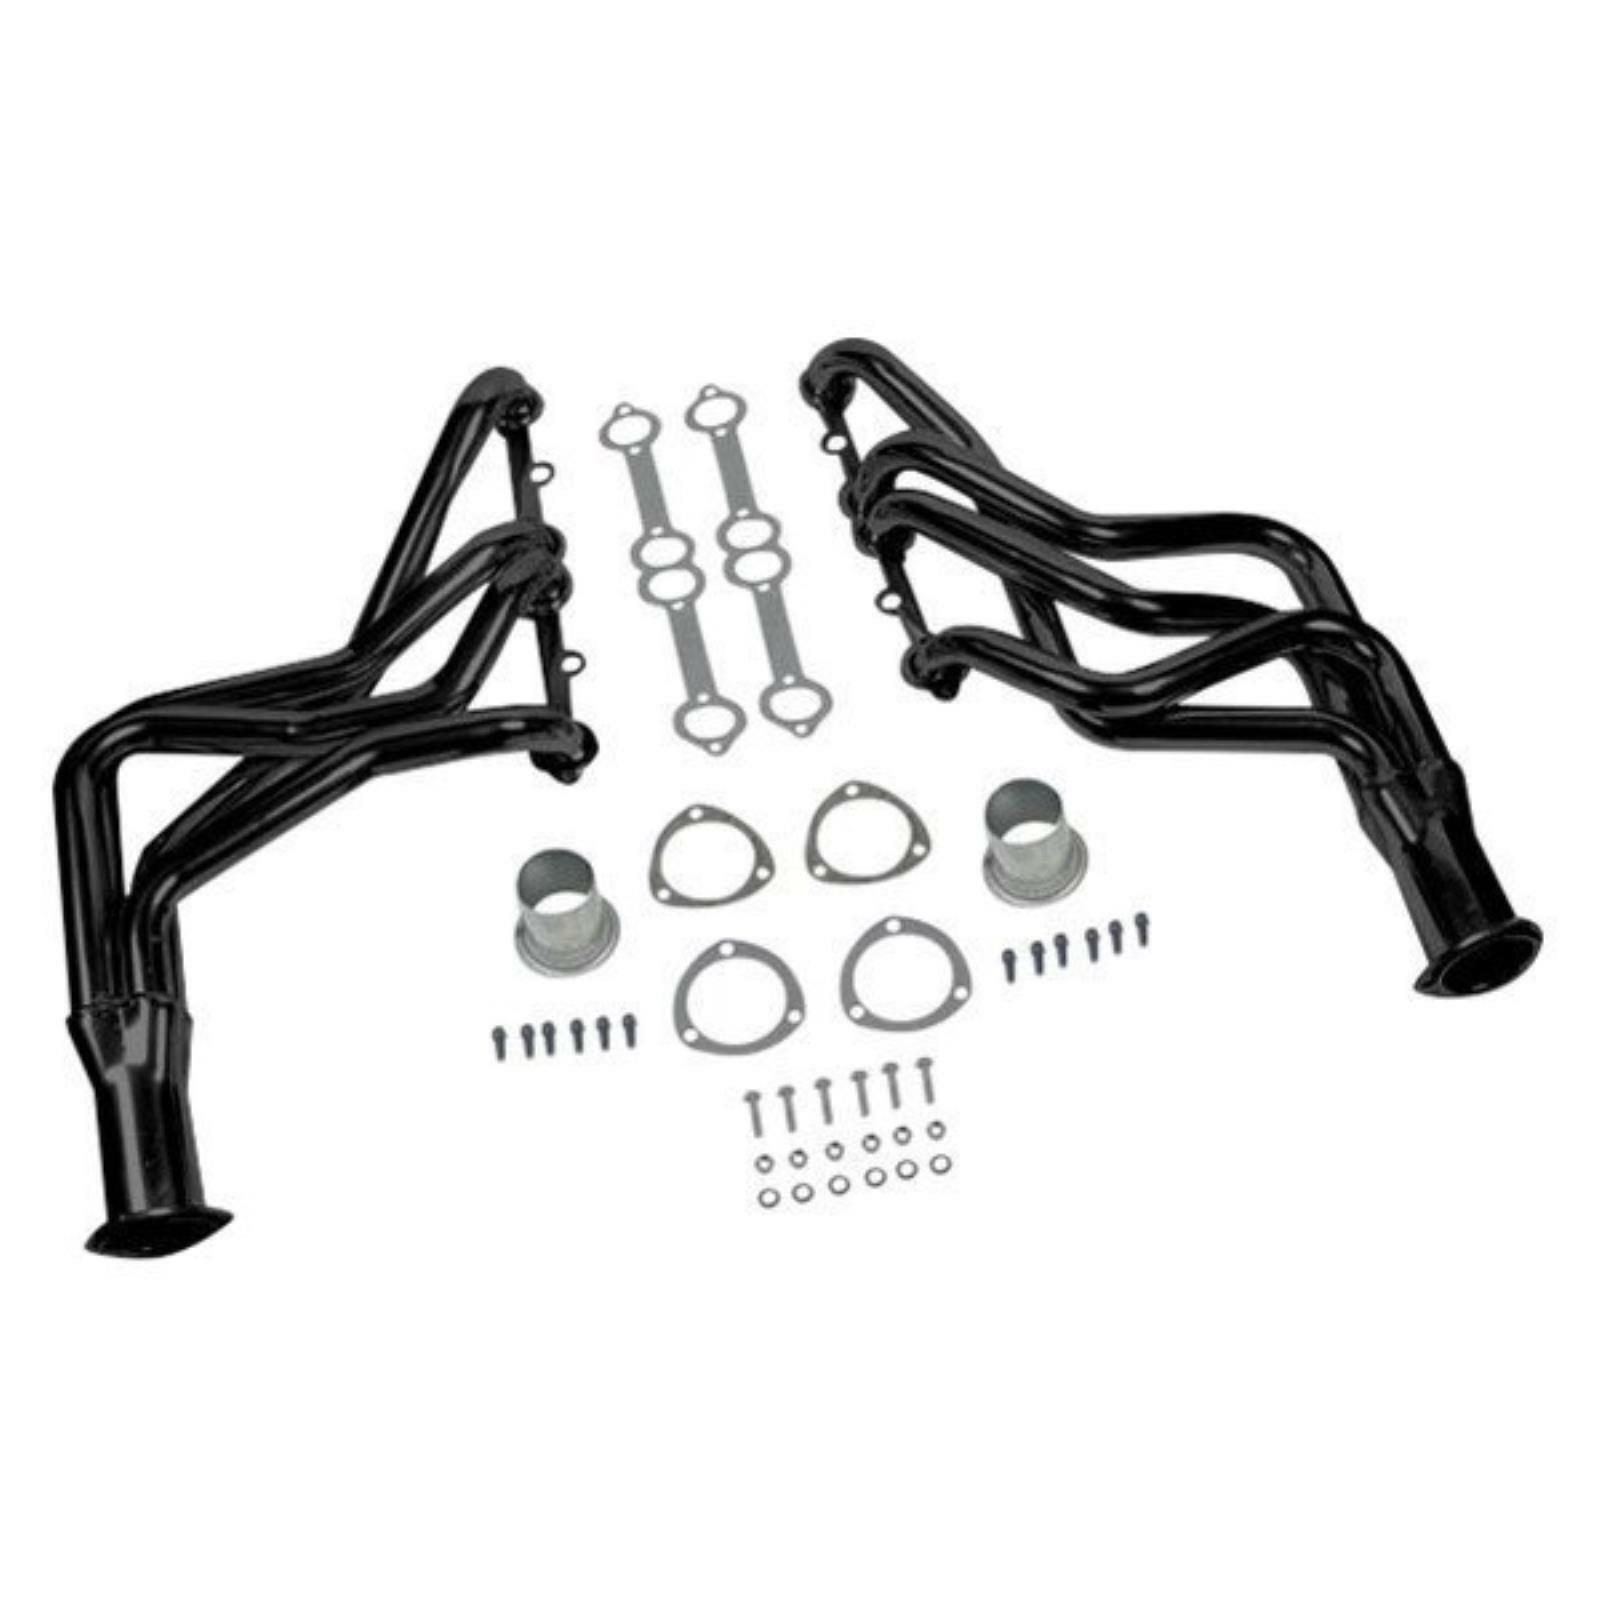 Mild Steel Black Painted Long Tube Exhaust Headers Fits 1966-1988 Chevy Caprice